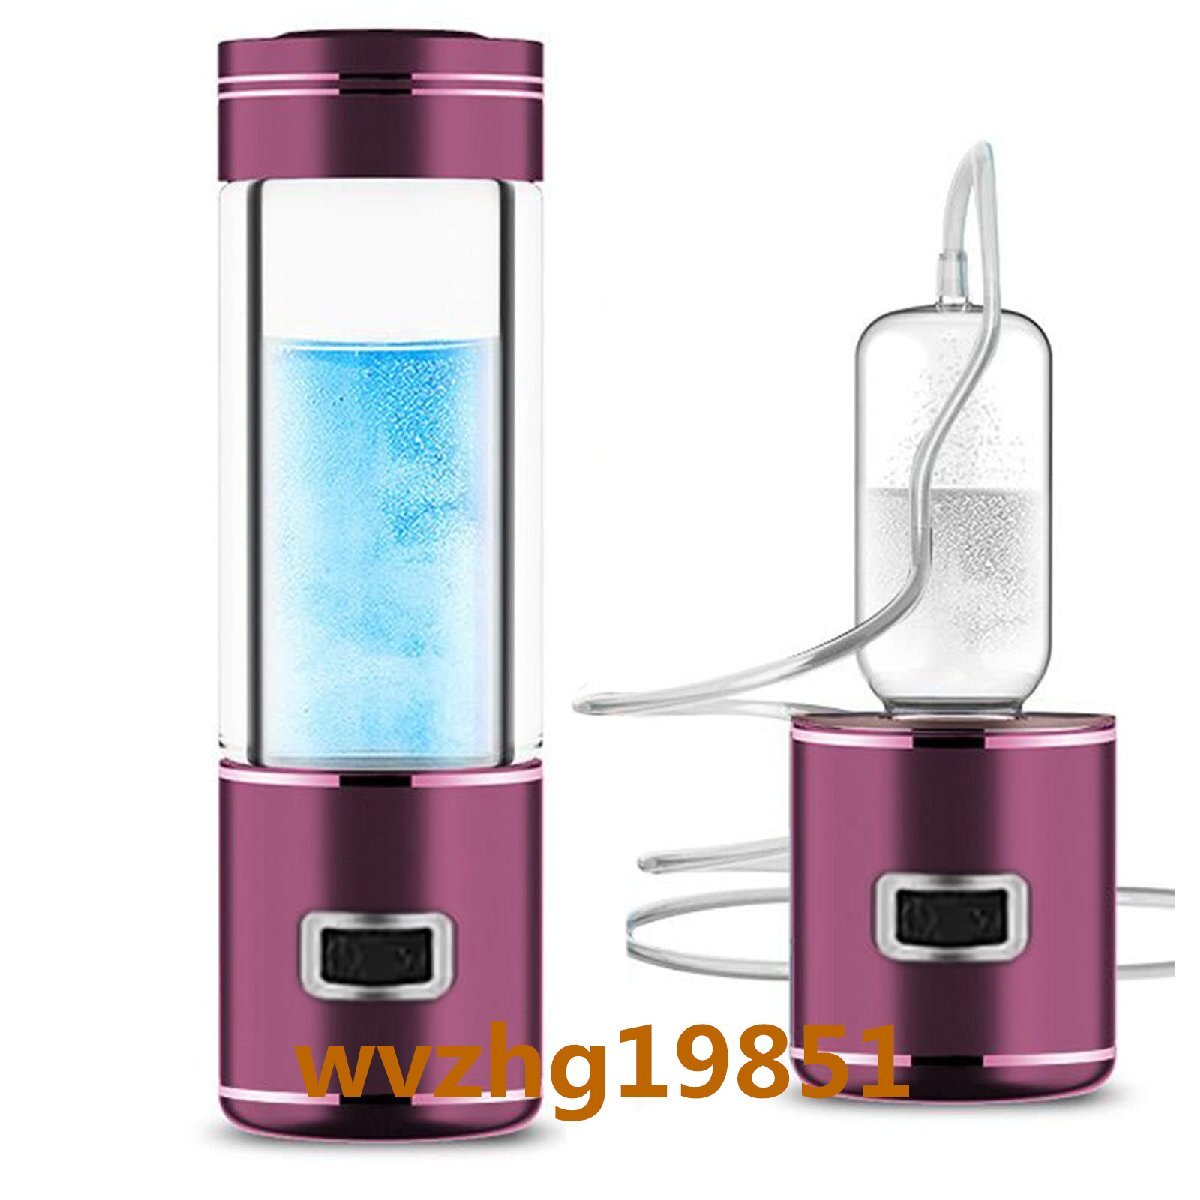  water element aquatic . vessel high density portable magnetism adsorption rechargeable water element water bottle 2000PPB one pcs three position 350ML cold water / hot water circulation bottle type electrolysis water machine water element generator cup purple 